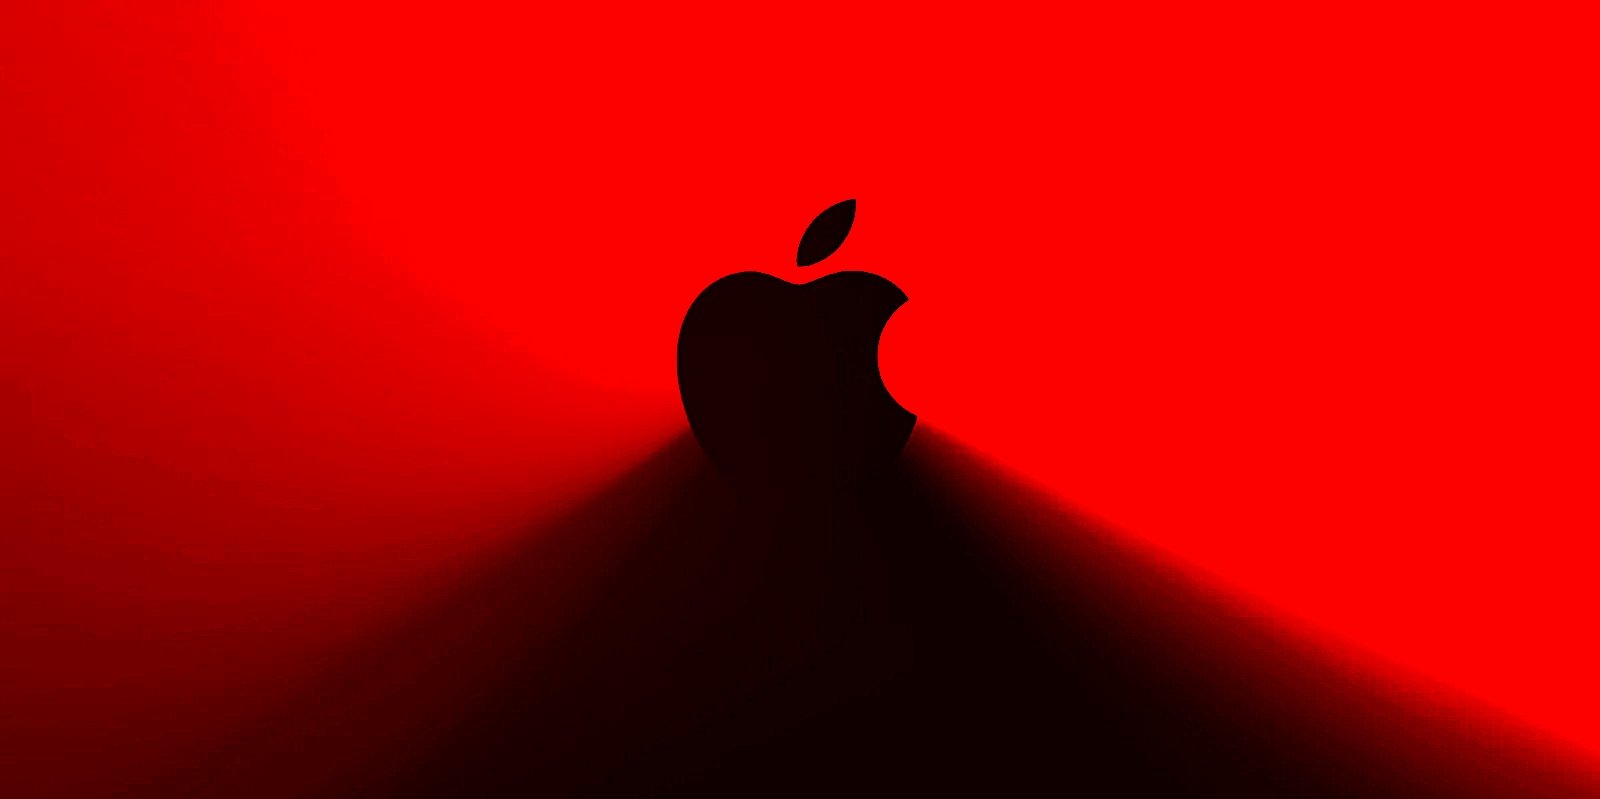 Apple logo with red background